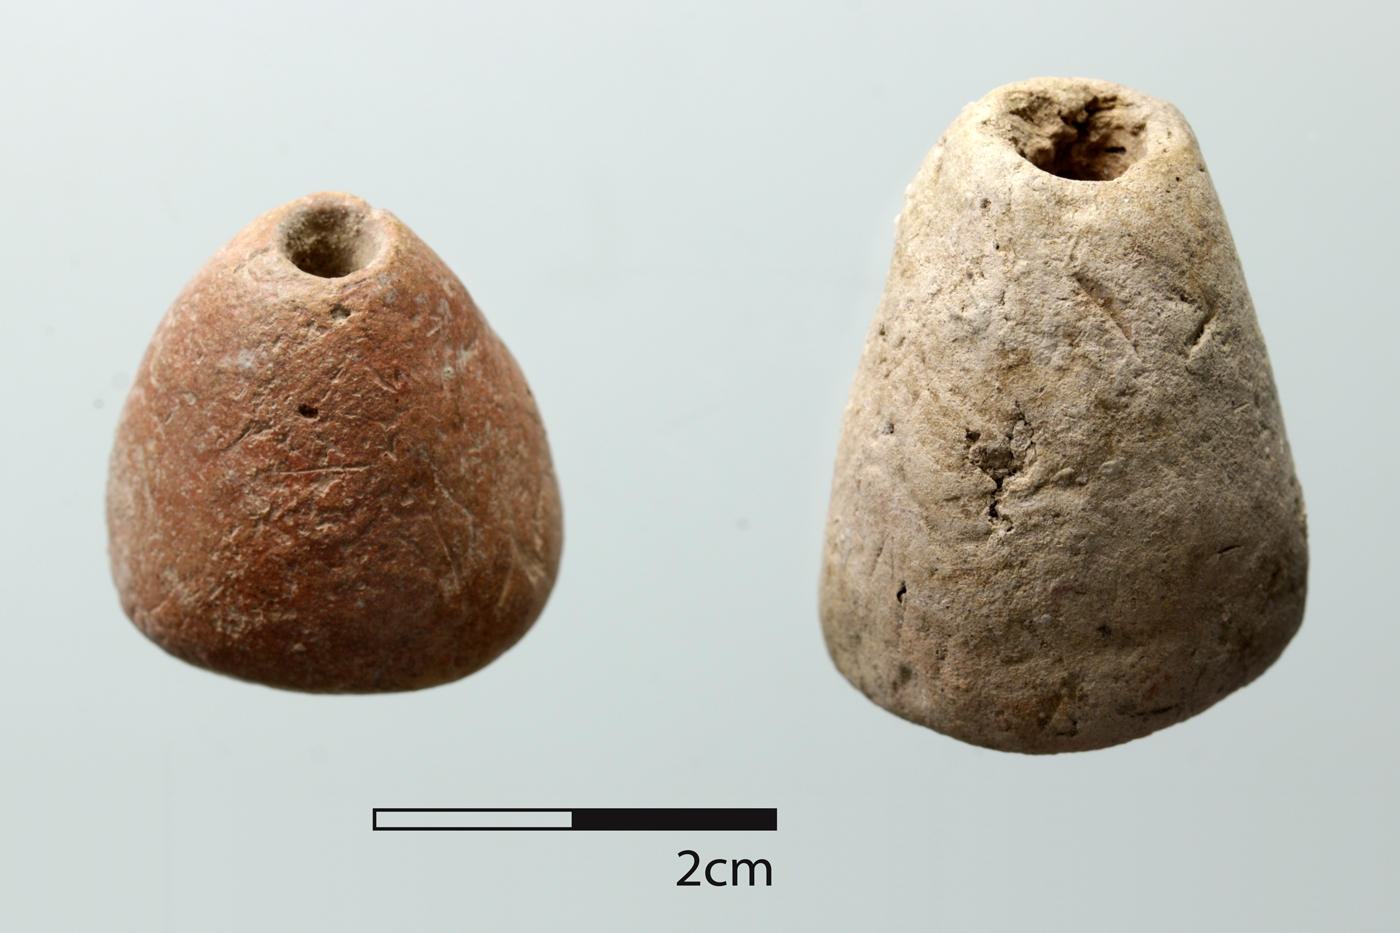 Two conical spindle whorls showing differences in size, overall form, and color